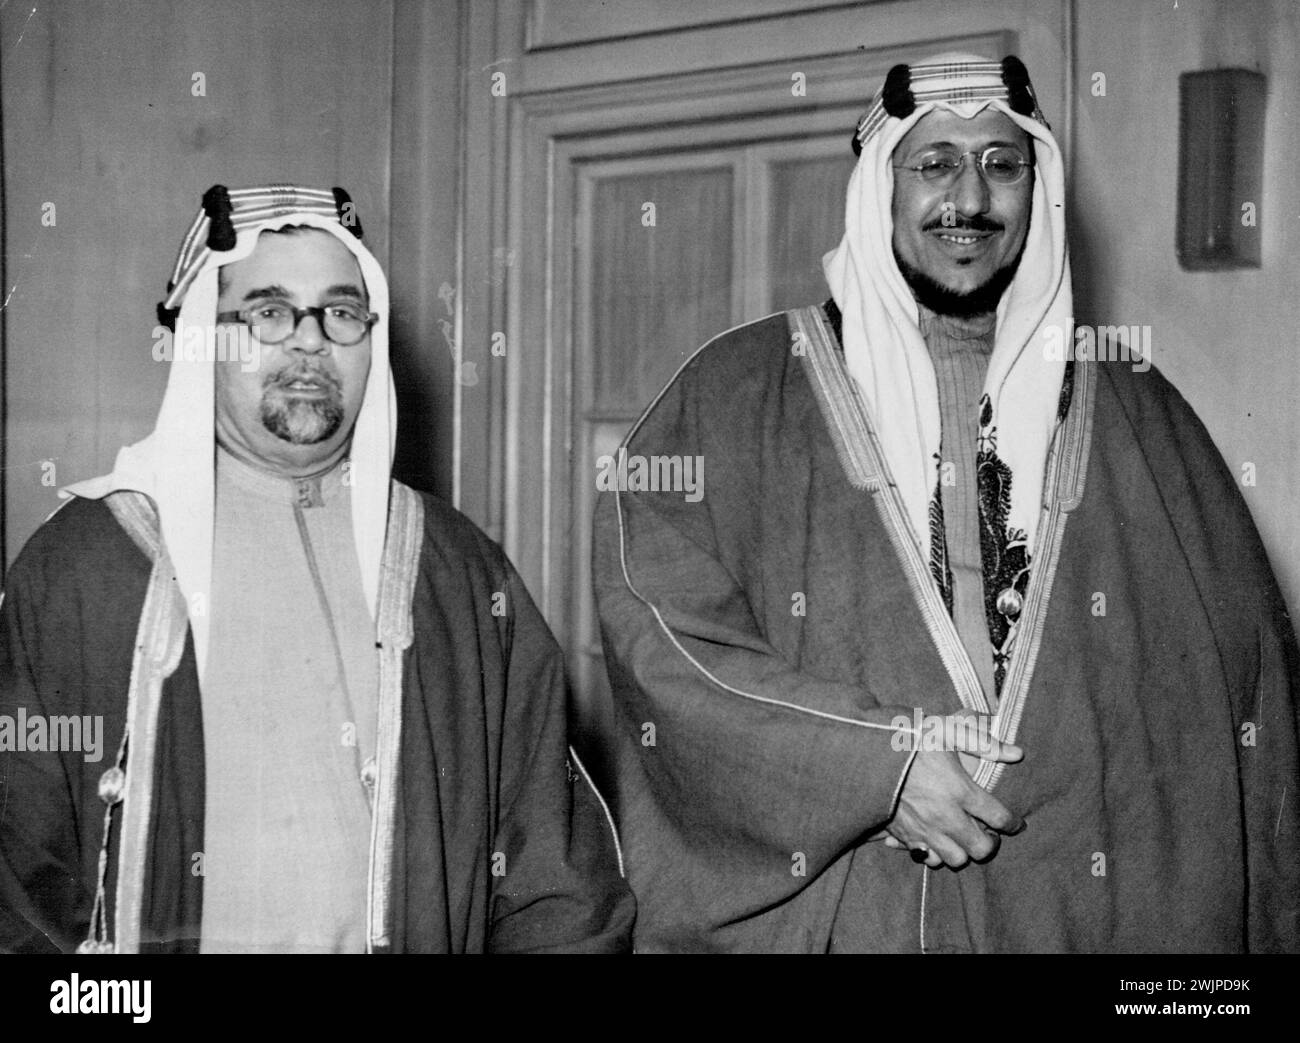 The Emir Saud (right) photographed with Sheikh Hafiz ***** K.C.V.O., Saudi Arabian minister in London, at the Dorchester hotel, London today (Thursday). The Emir Saud, crown prince of Arabia, arrived in London by air today from the United States of America. He came in president's own plane after having spent a month as Mr. Truman's guest. Although his visit is described as semi official, It is thought that the crown prince will undoubtedly see Mr. Bevin, the foreign secretary. A trust oriental, the Emir knows no English, wears colorful flowing rooms, and his an attendant bodyguard ***** wi ... Stock Photo